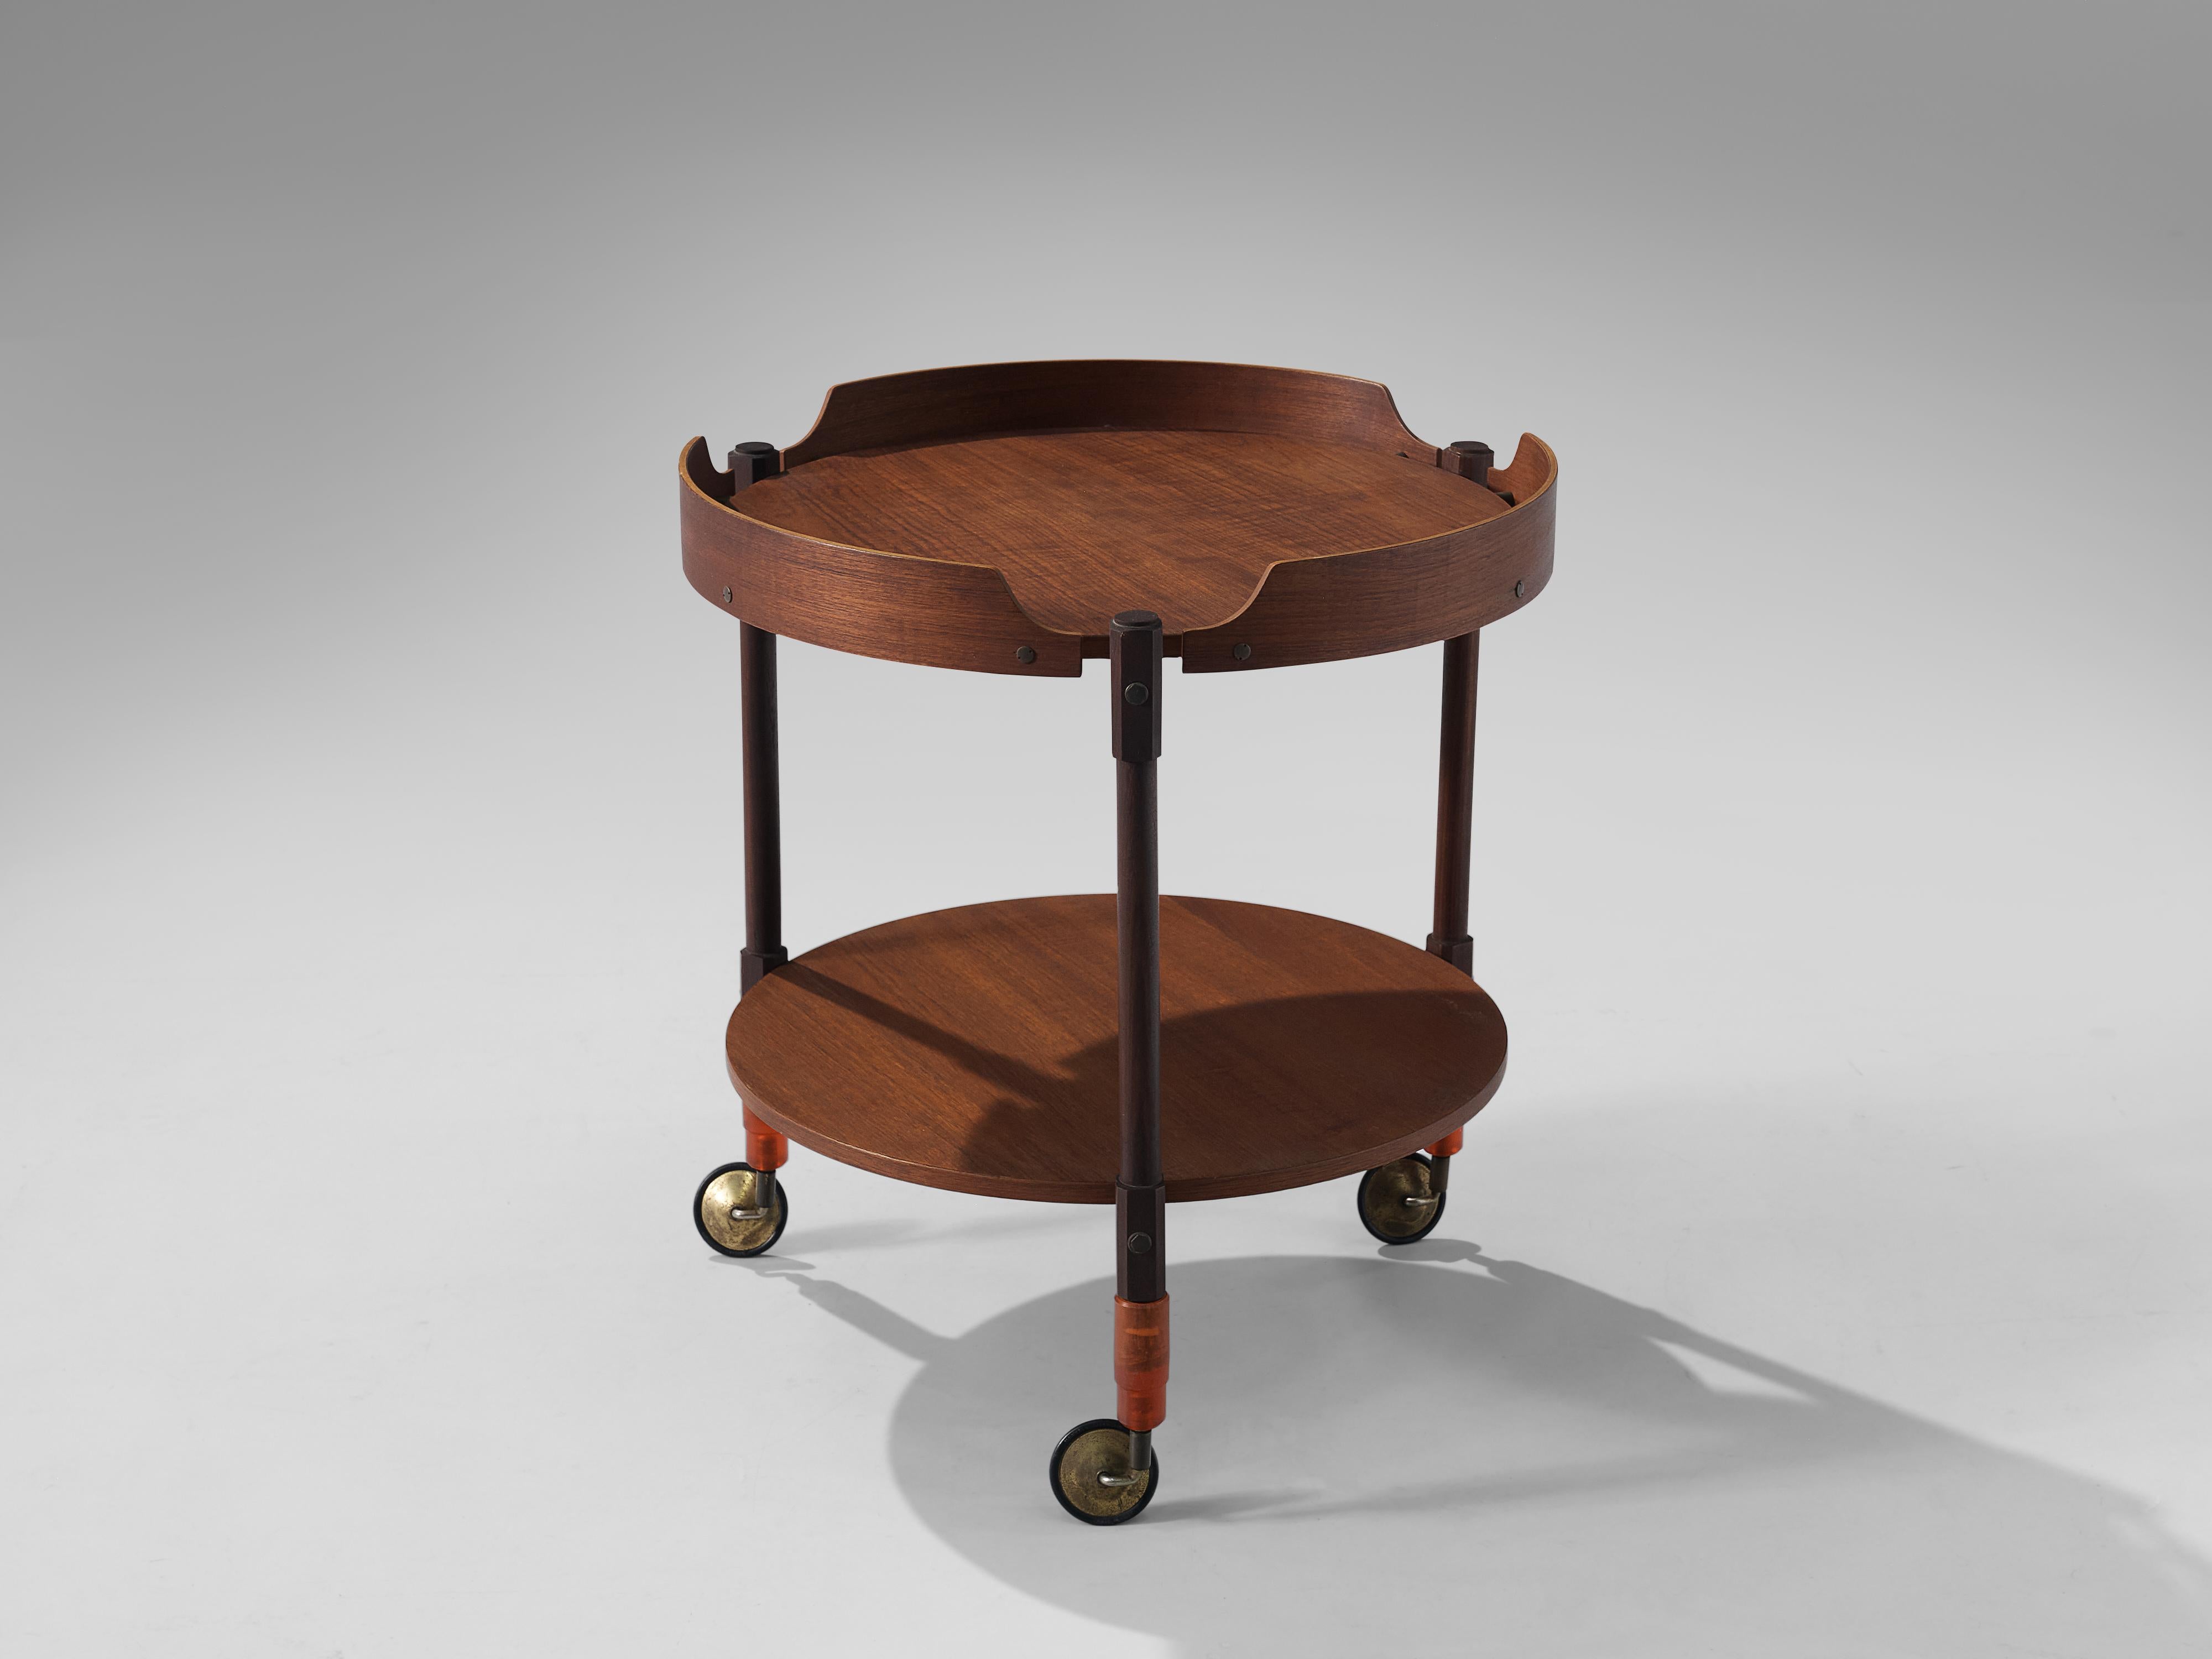 Liquor trolley, teak, brass, Italy, 1960s

Elegant liquor trolley in teak. The trolley has two layers that can be used for storage or serving functions. Due to the warm color of the teak in combination with the brass, the trolley has lovely